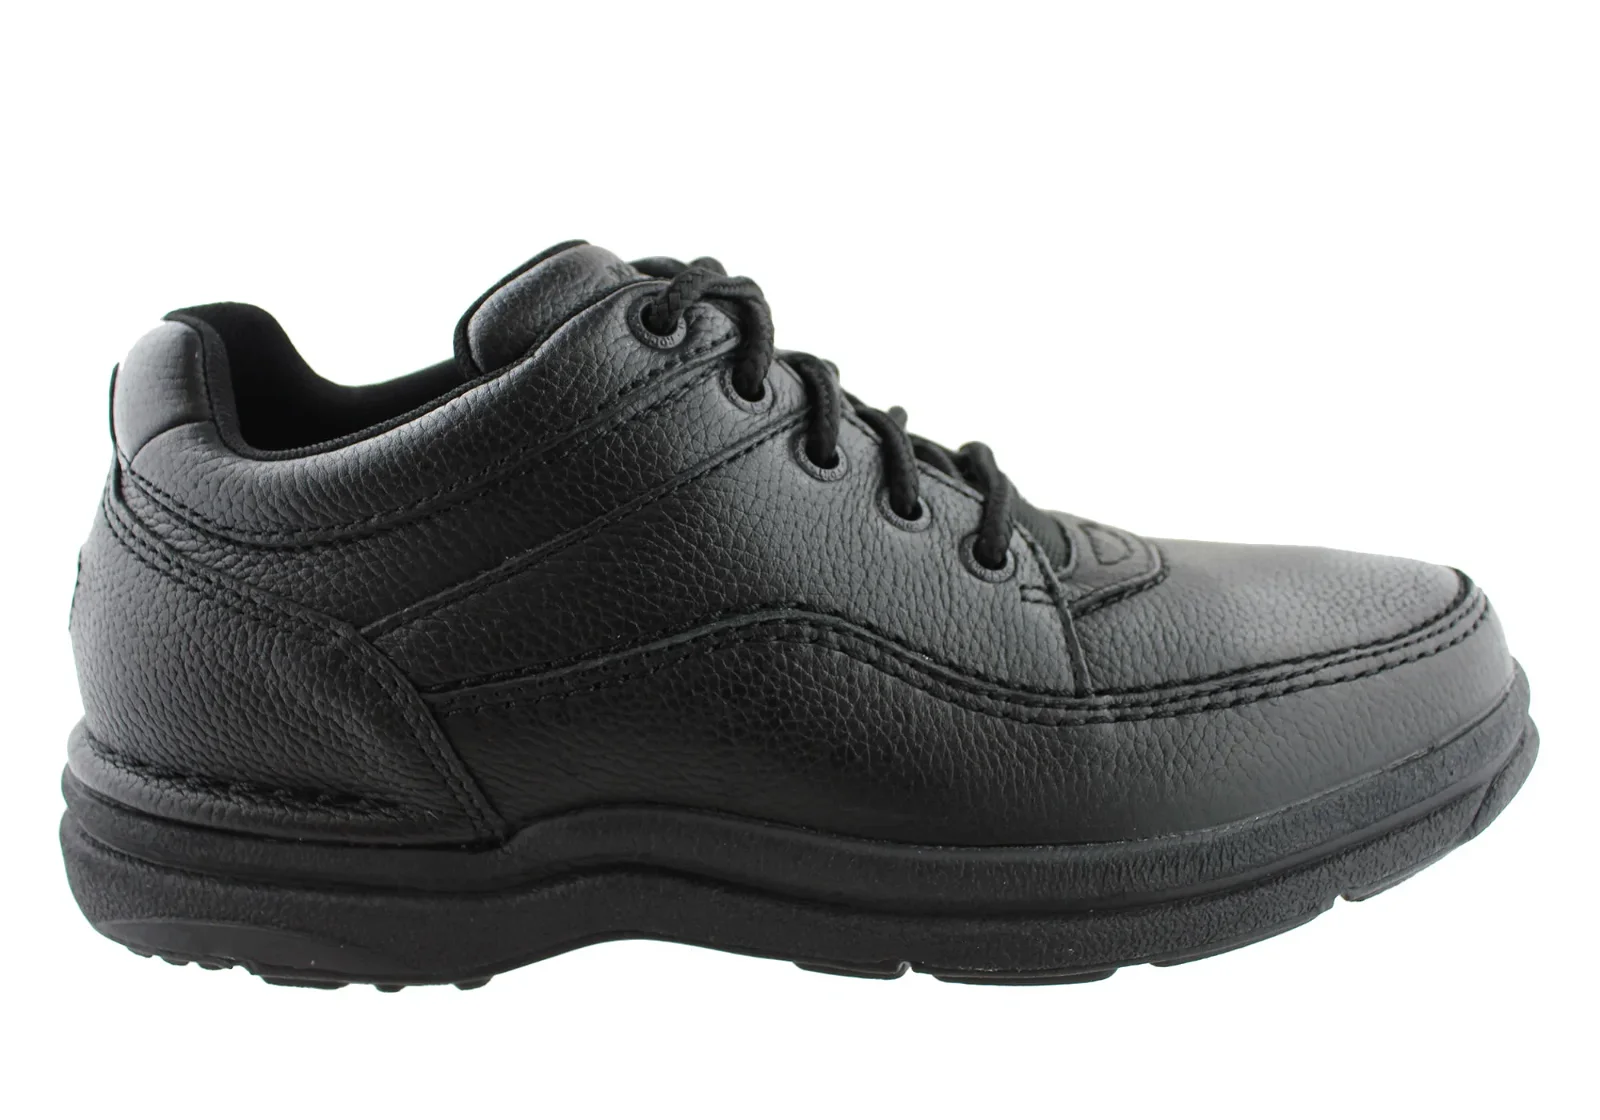 Image of Rockport World Tour Classic Mens Comfort Wide Fit Walking Shoes